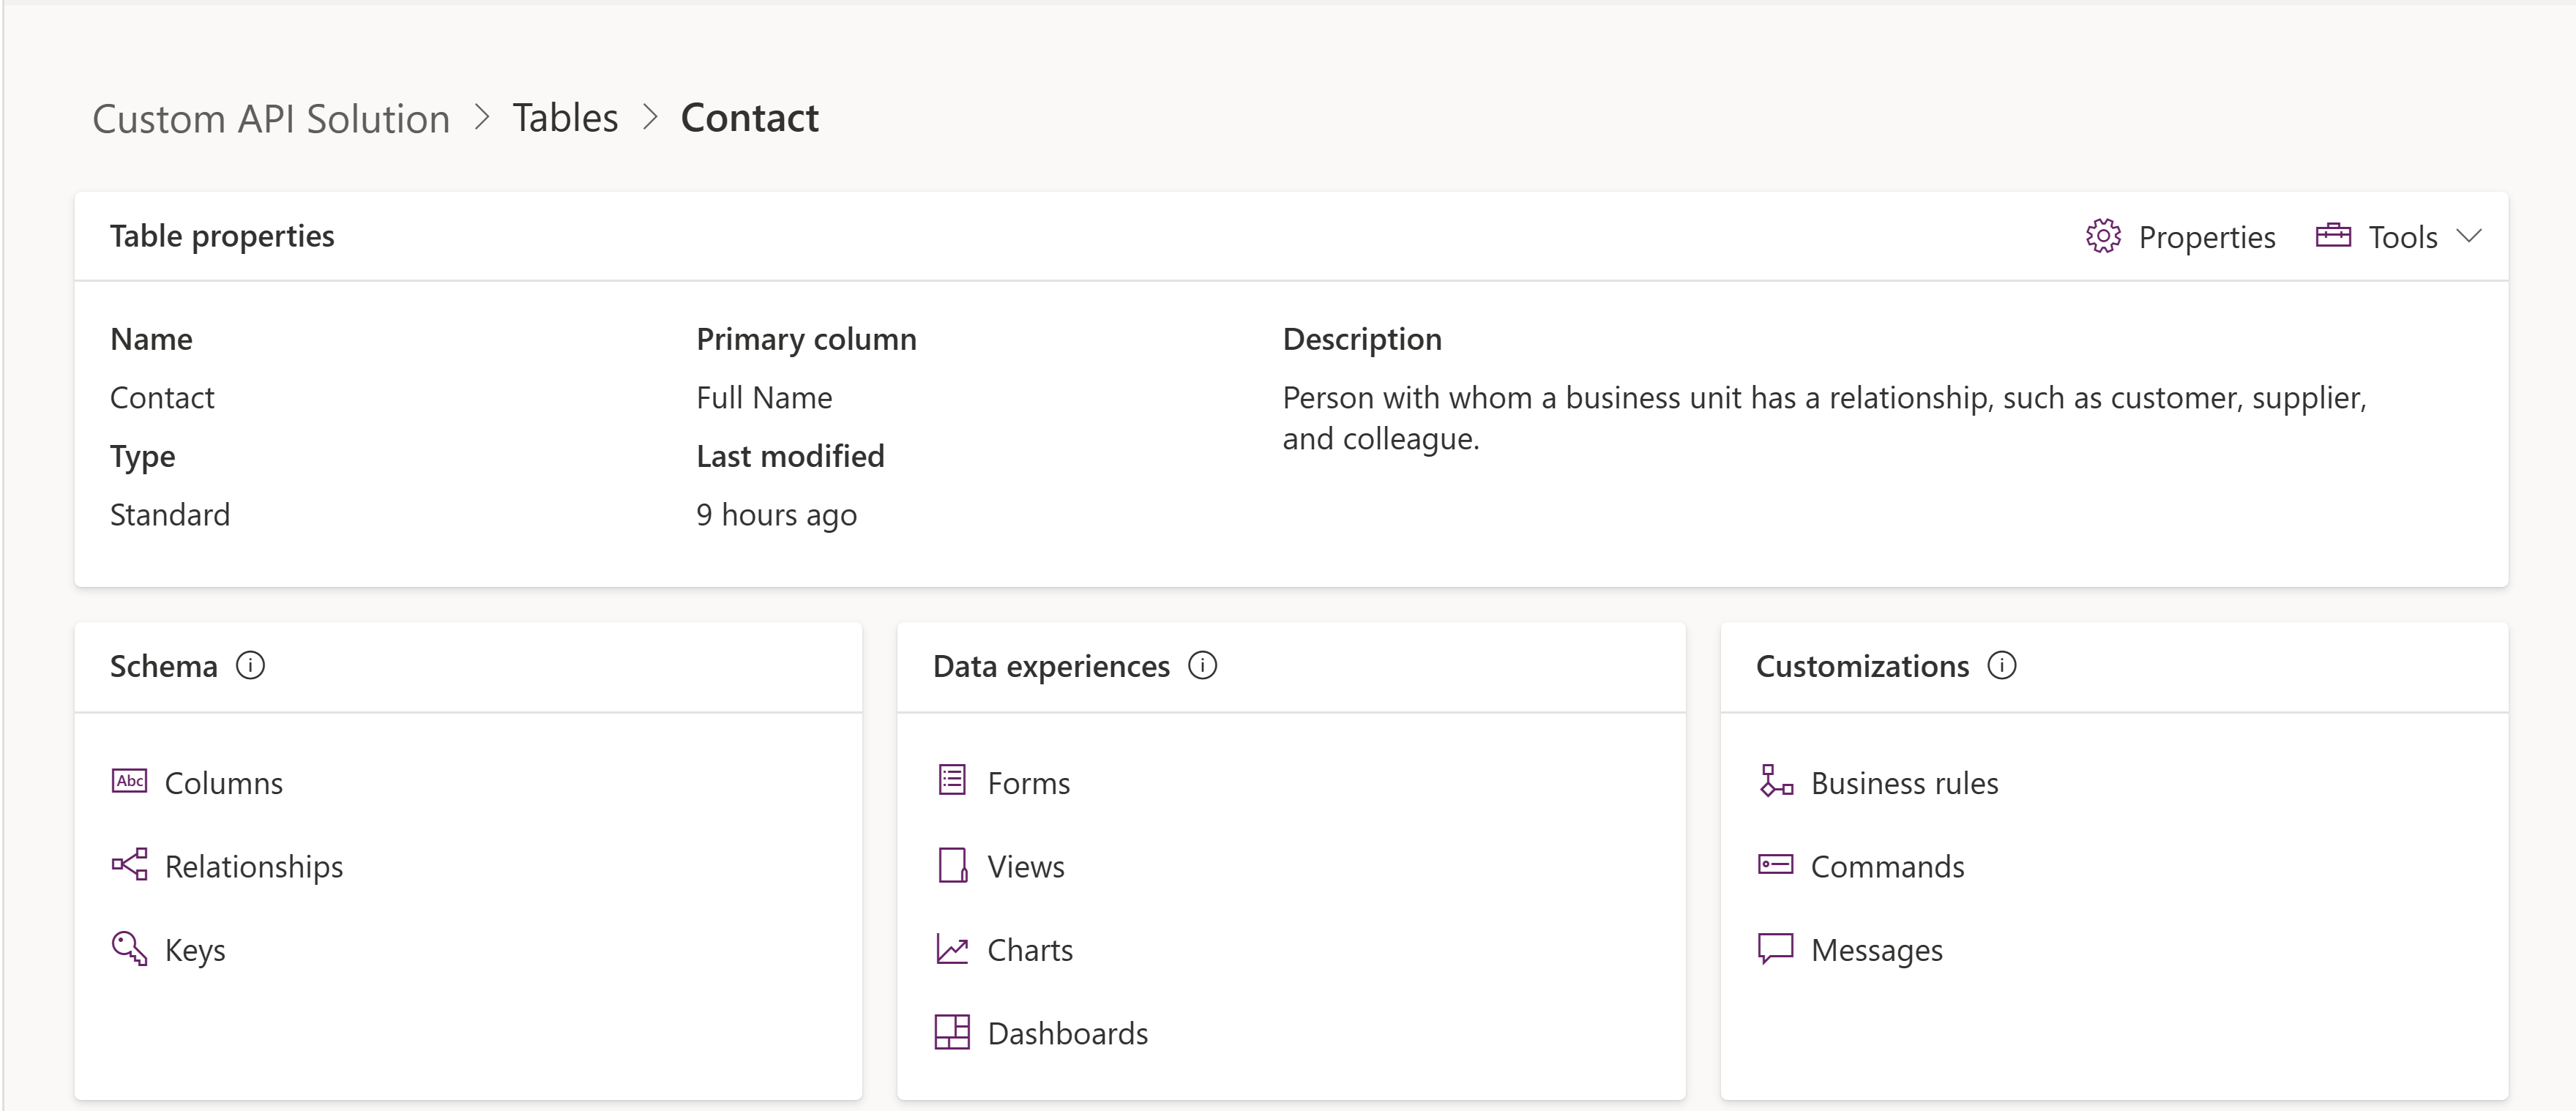 The image shows how to add contact forms to the Custom API solution.